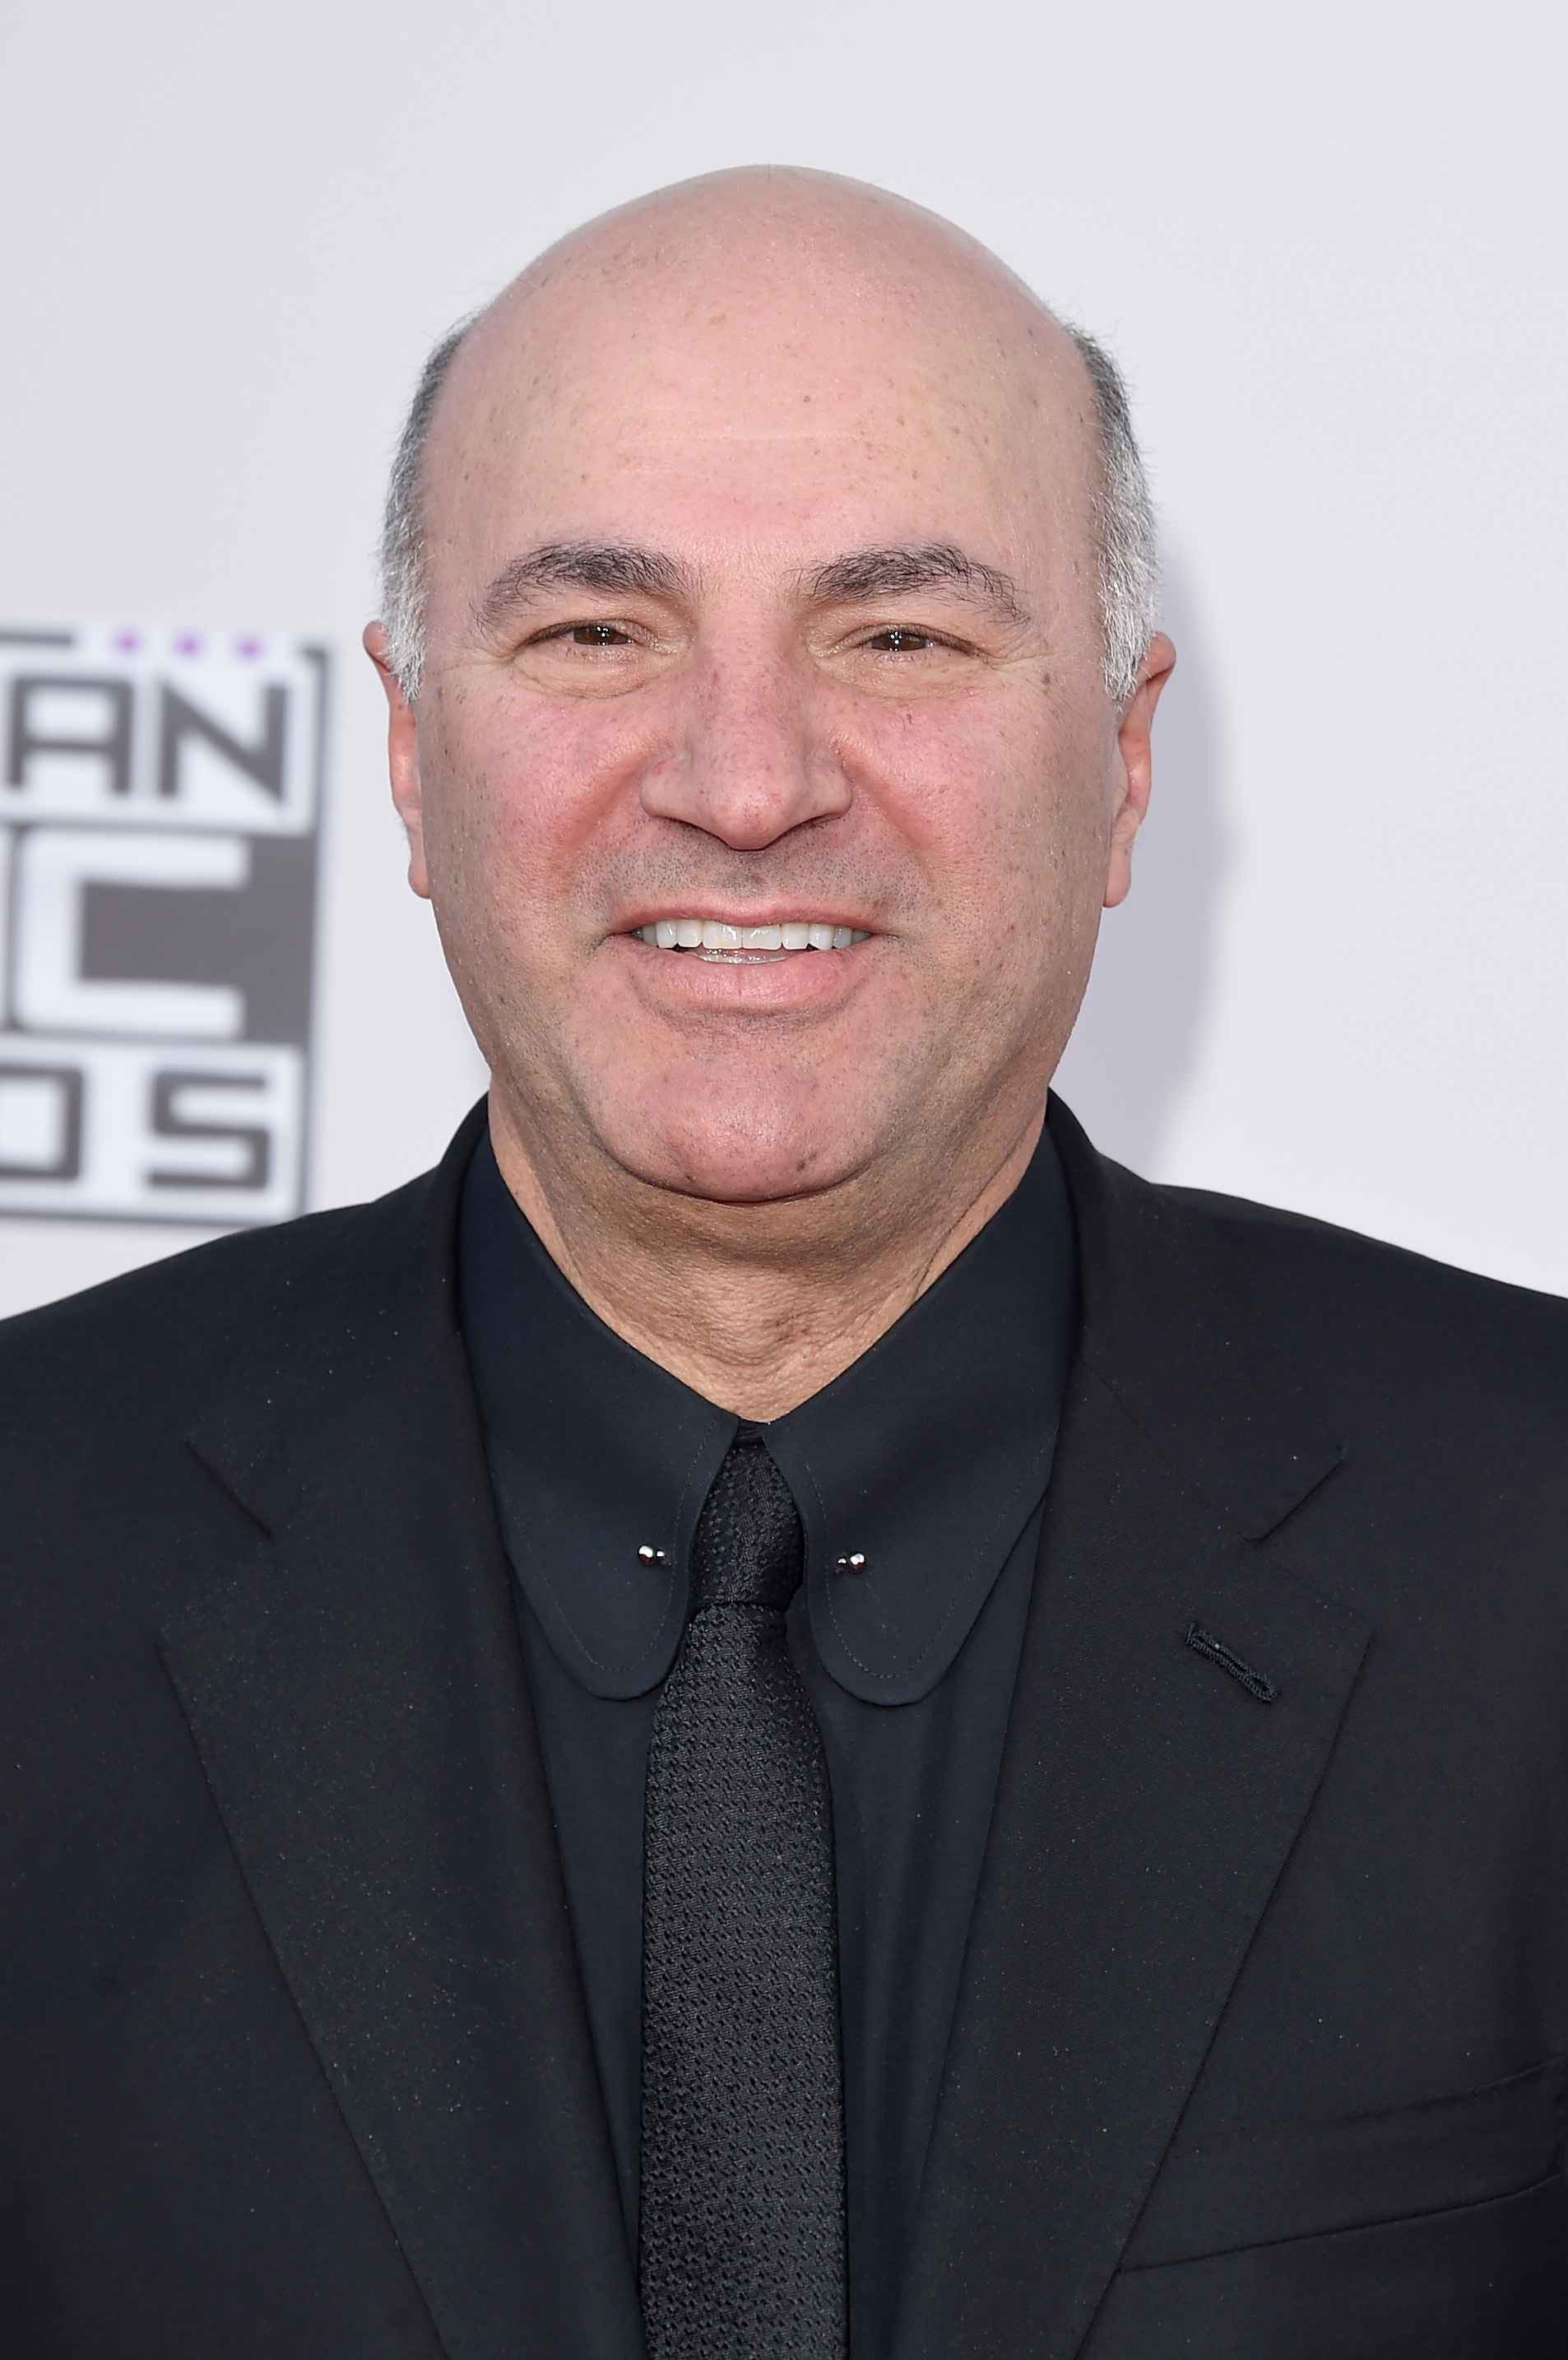 Kevin O’Leary Net Worth 5 Fast Facts You Need to Know